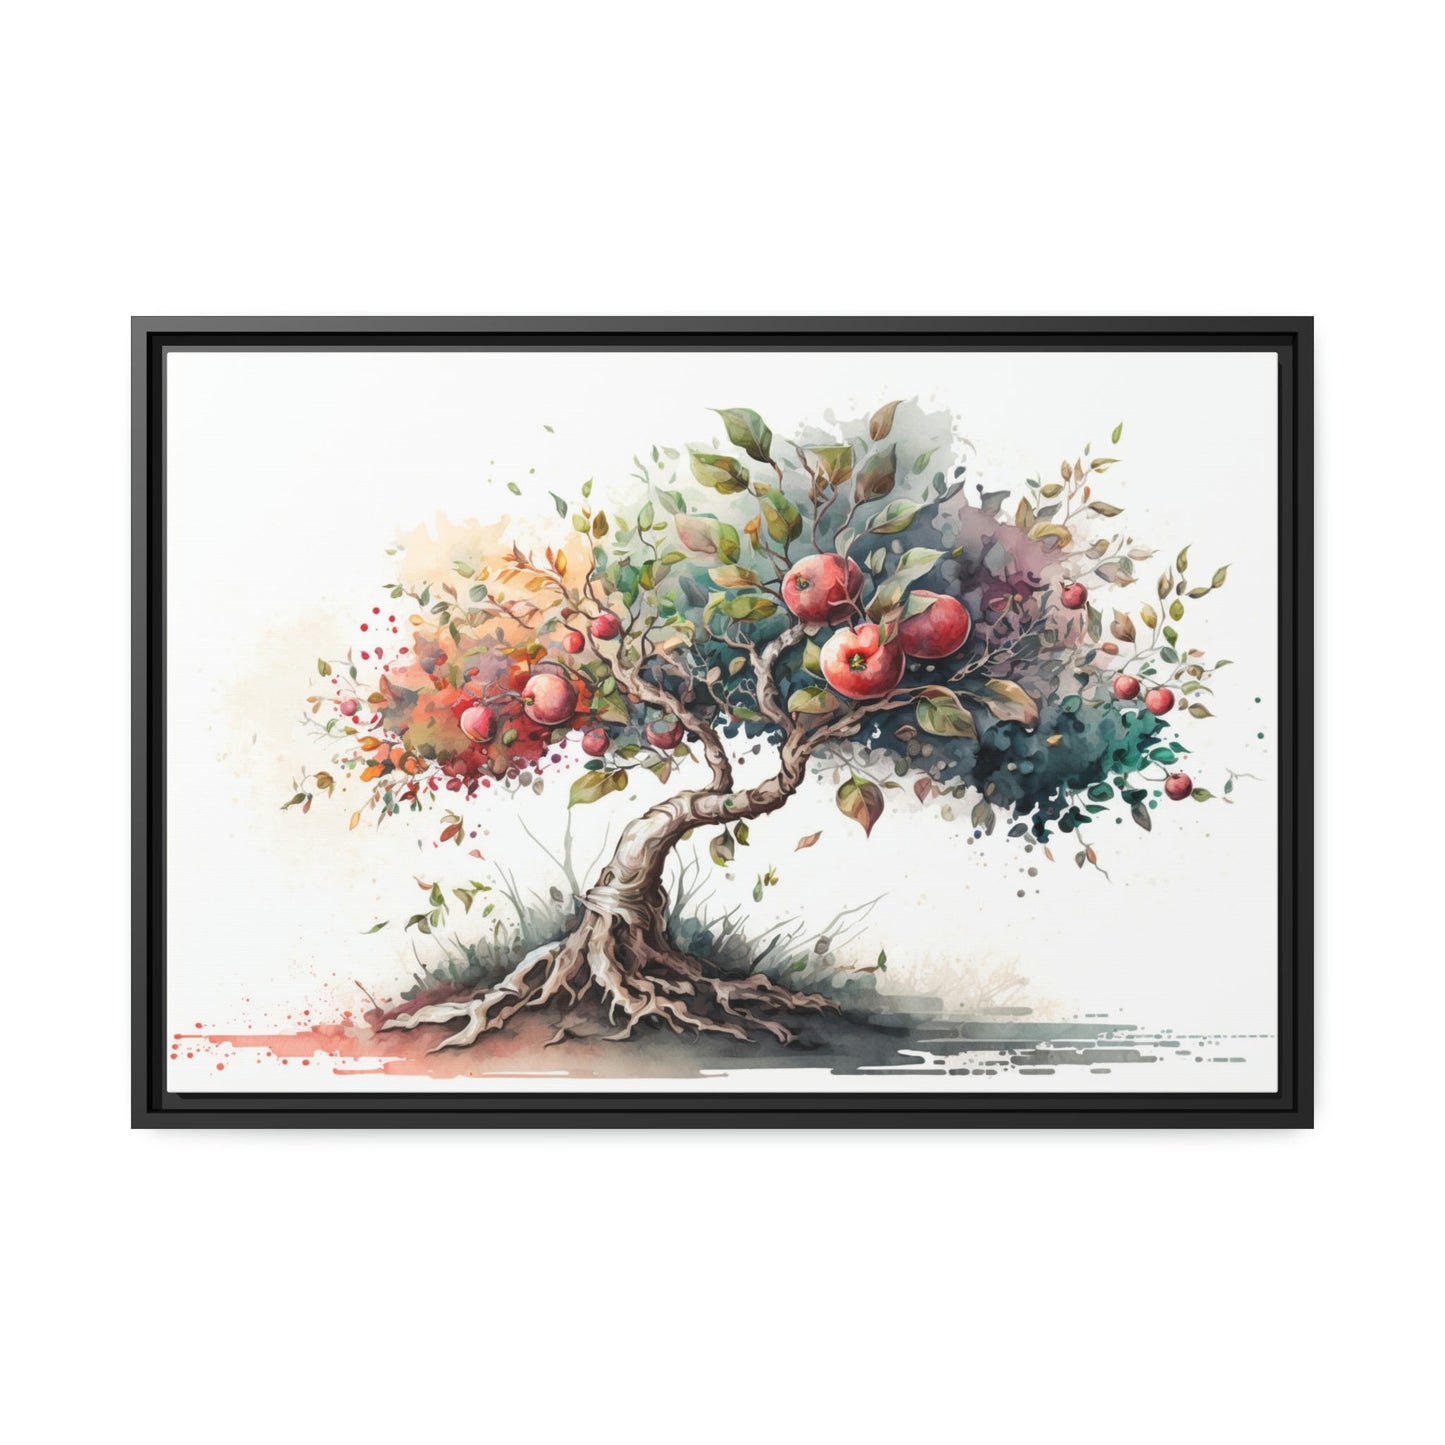 Tapestry of Apple Trees: Natural Canvas & Poster Print of Orchards